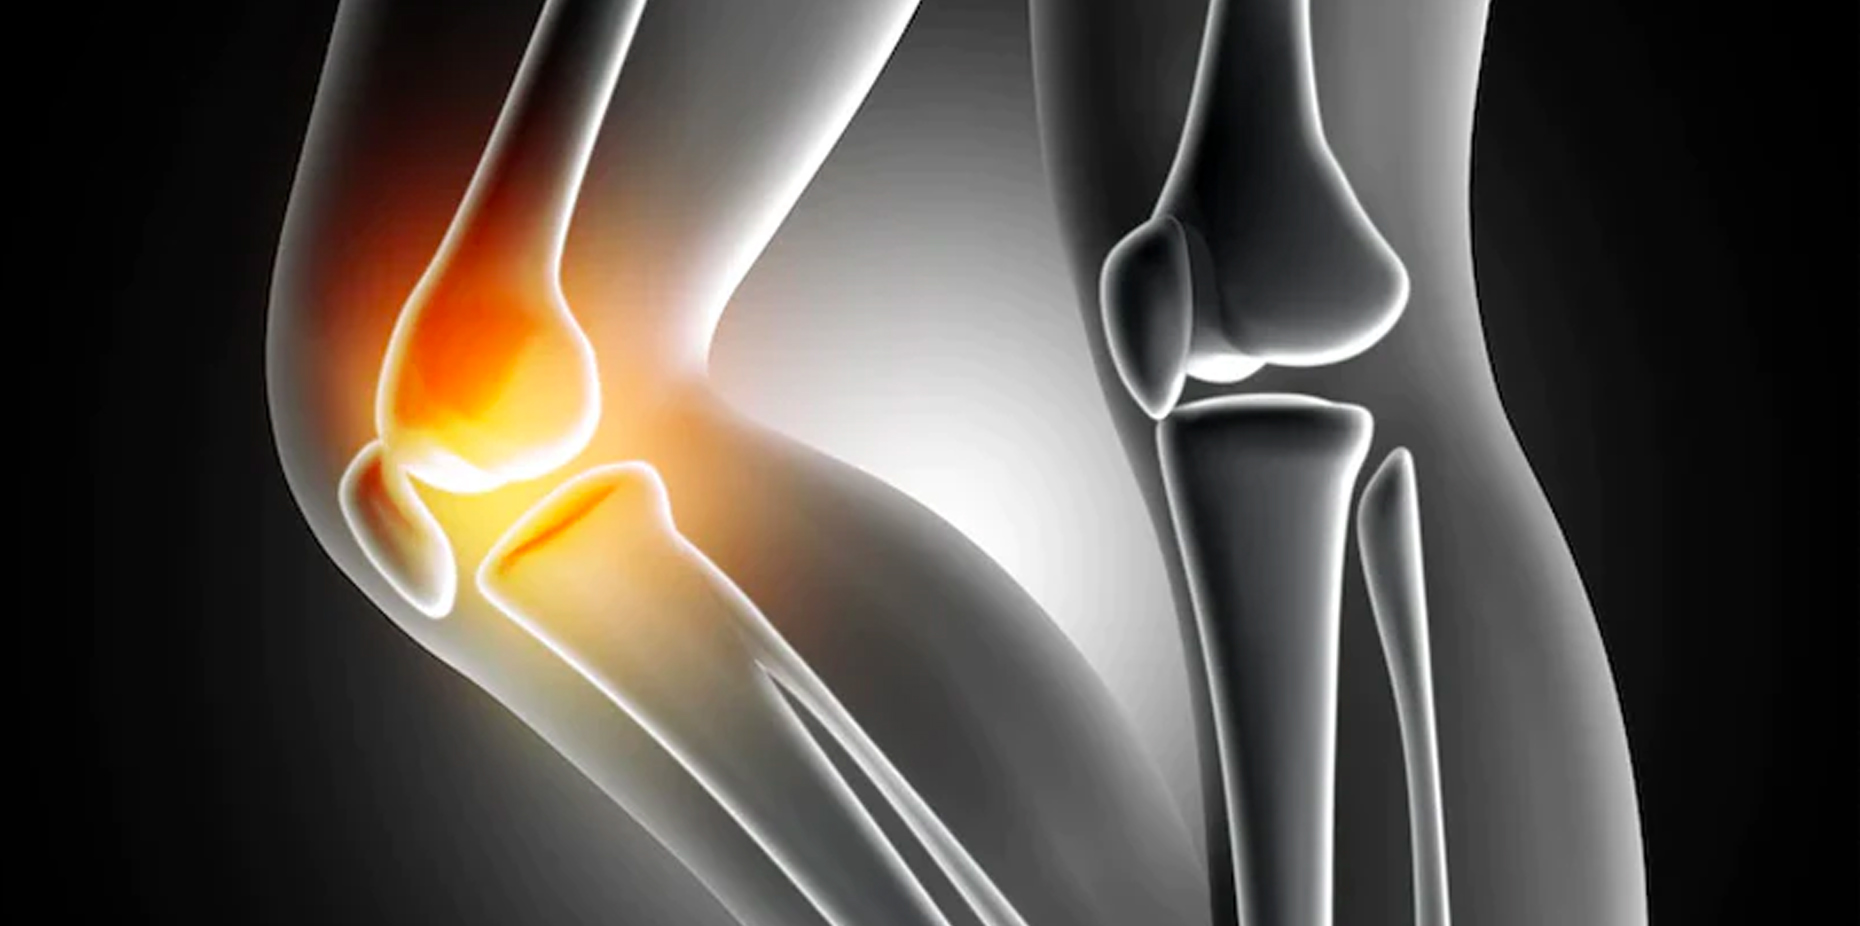 Osteopenia: Causes, Diagnosis, Treatments, and More